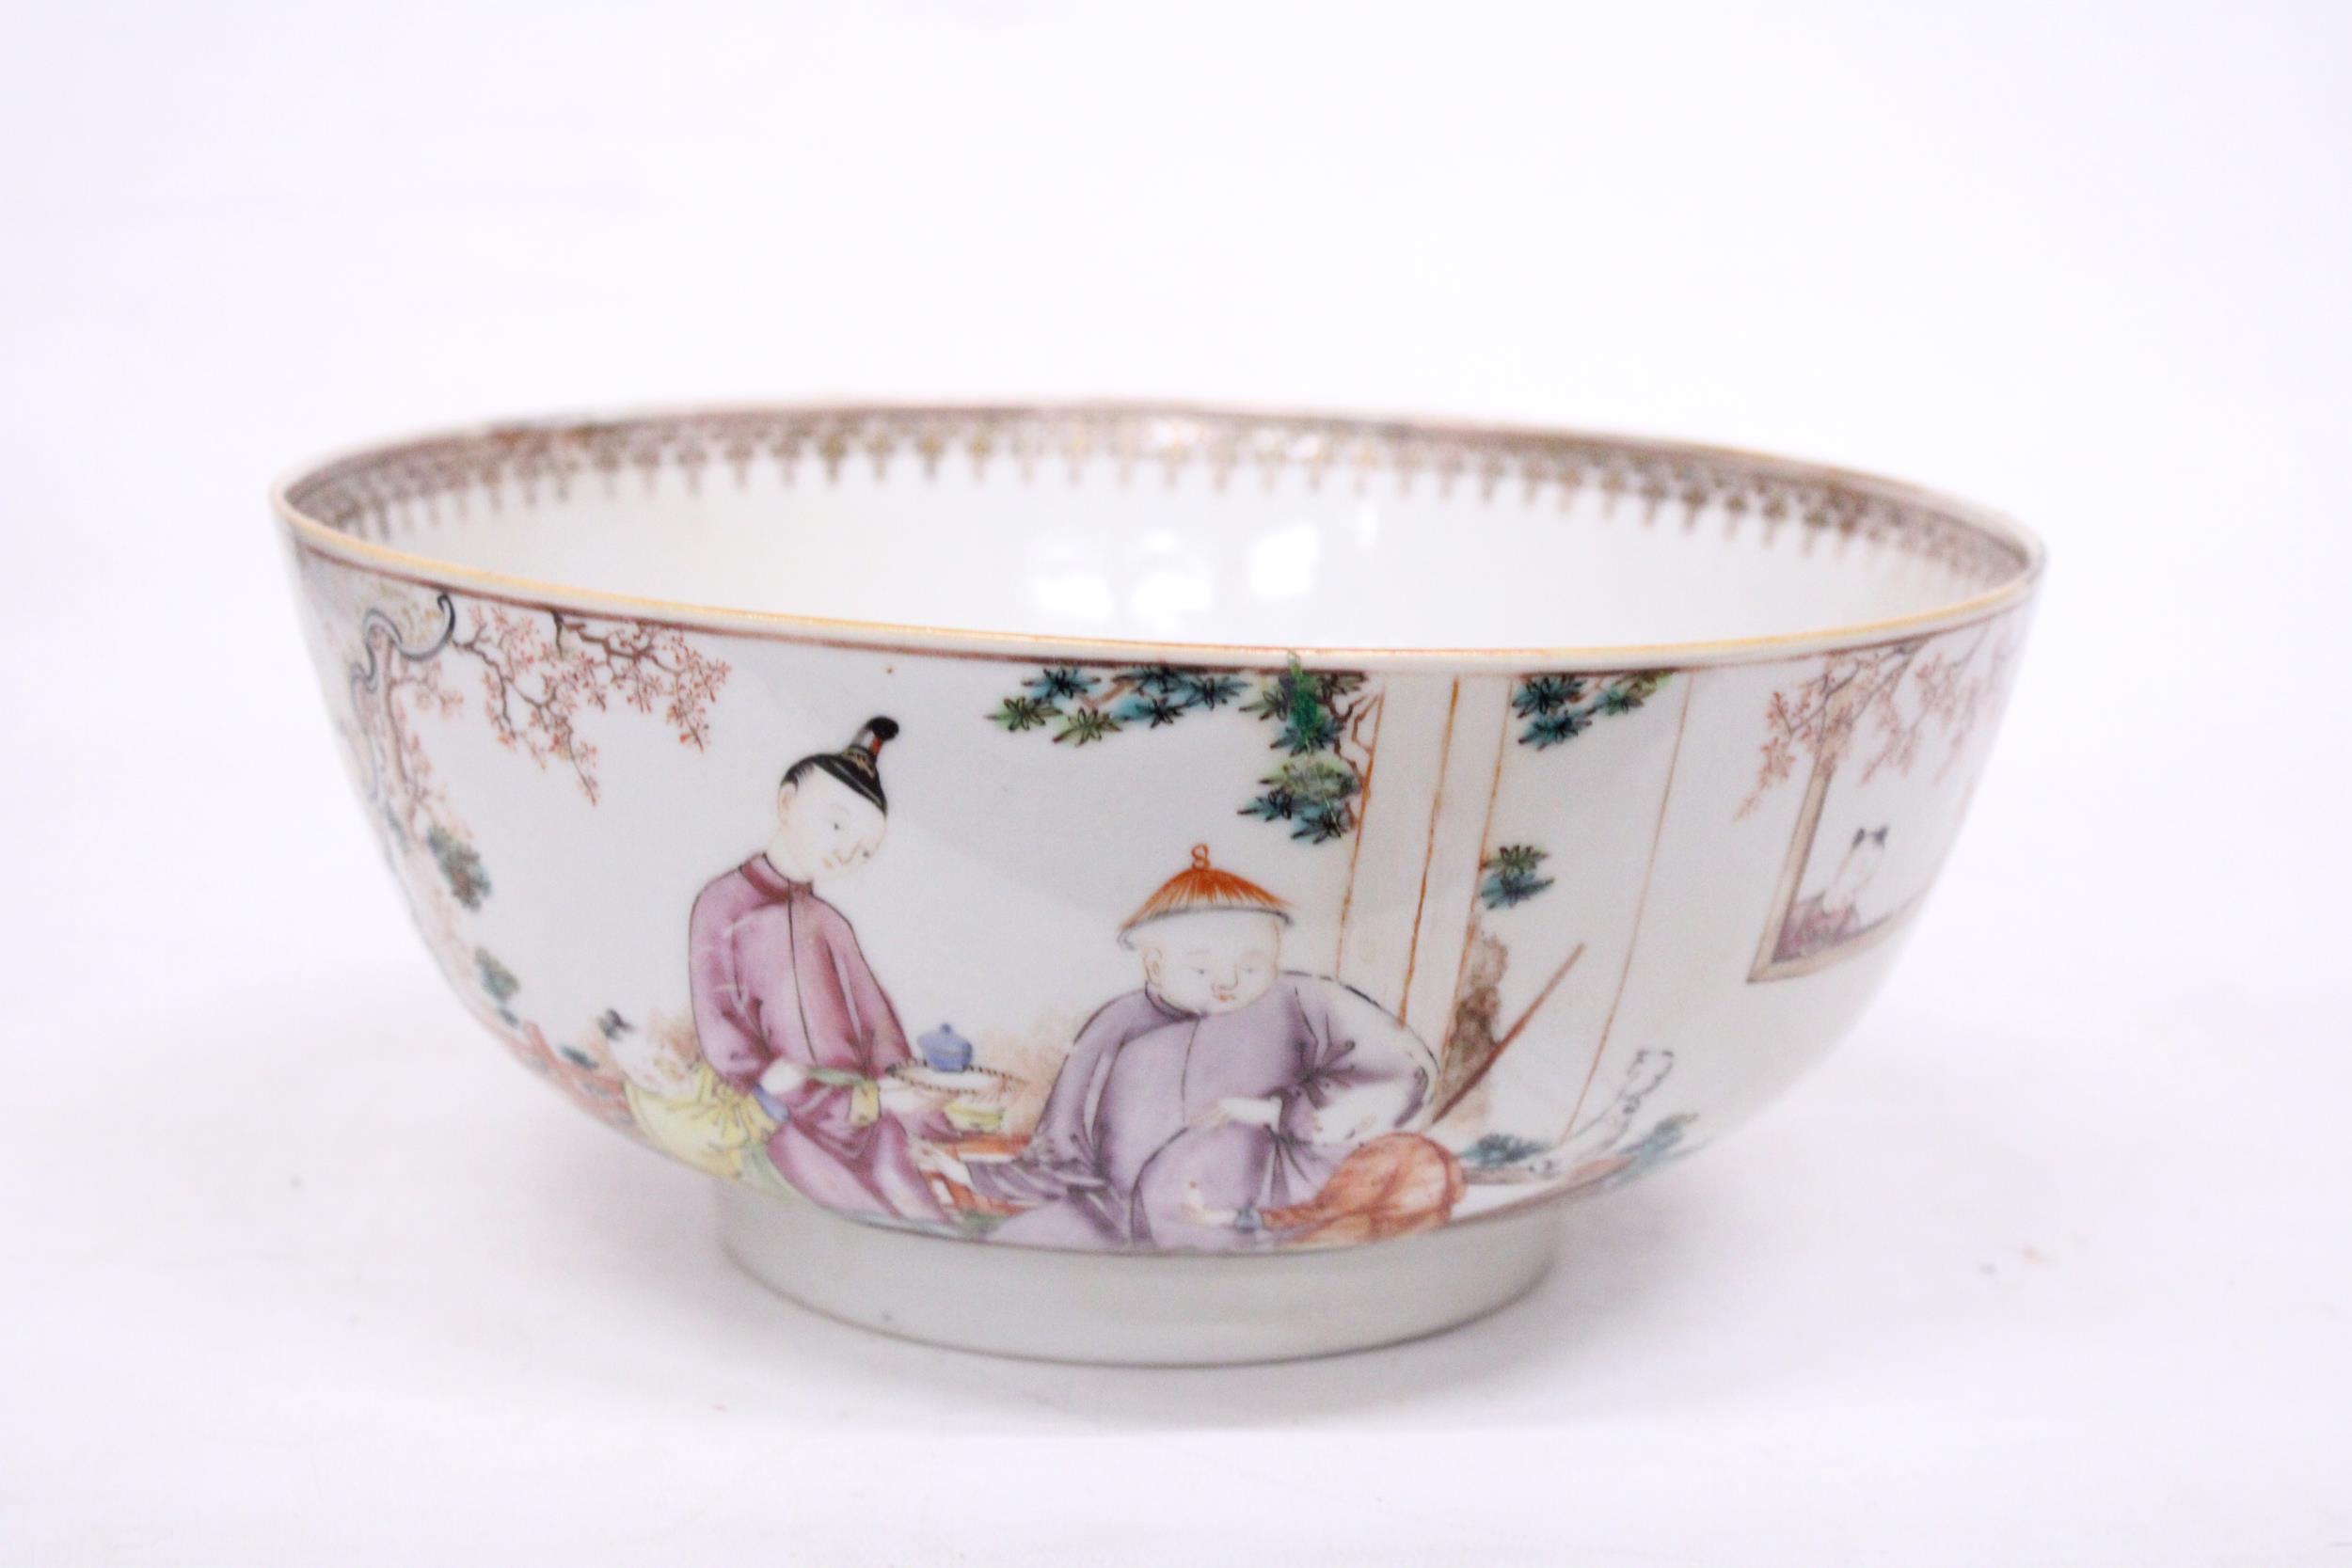 A CHINESE EXPORT FIGURAL DESIGN FOOTED BOWL - 11 CM (H) - 25.5 (D)